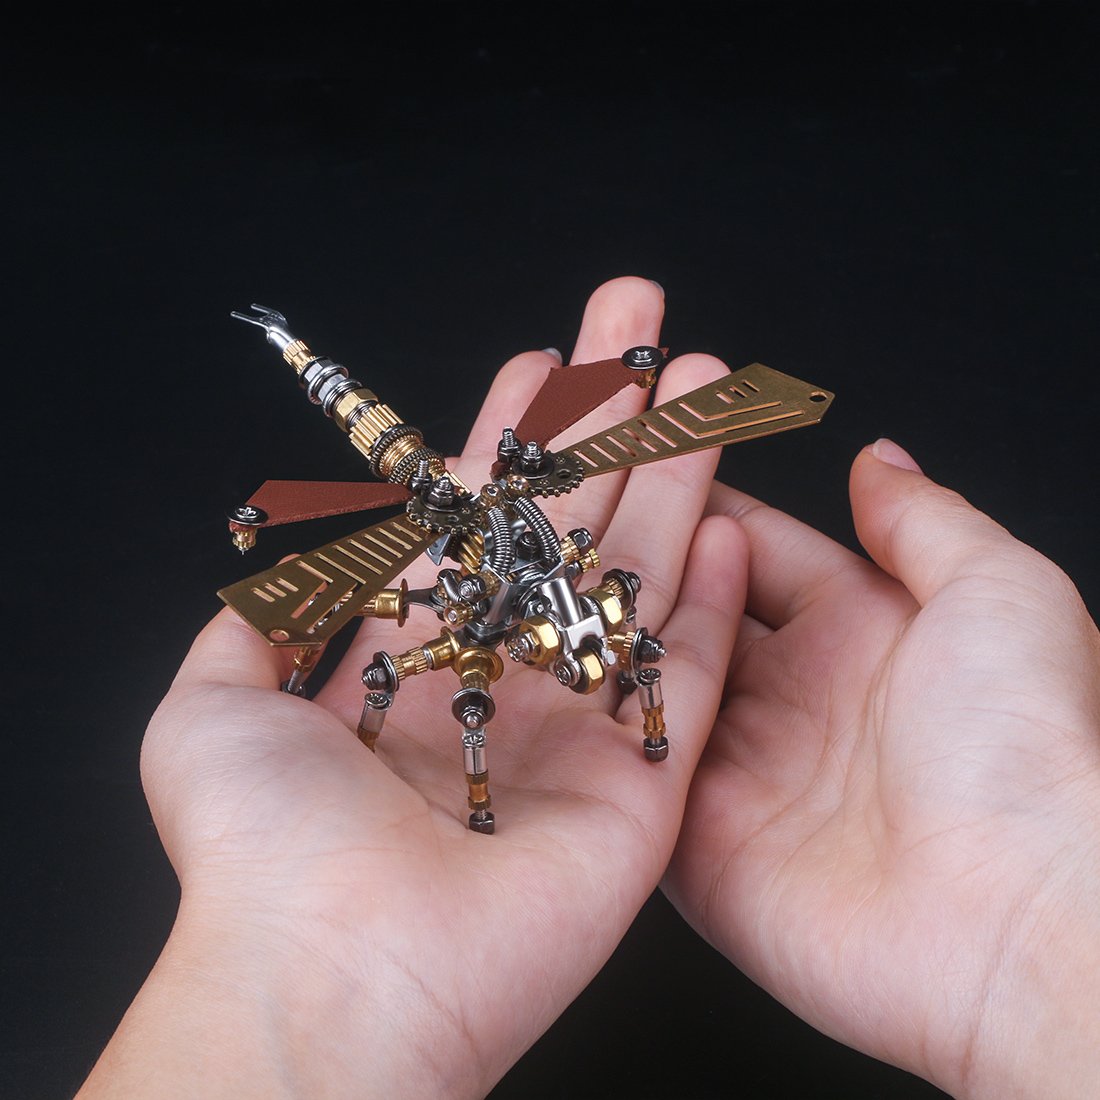 Blind Box 3pcs/set DIY Mechanical Assembly Metal Steampunk Insect Puzzle Model Kit